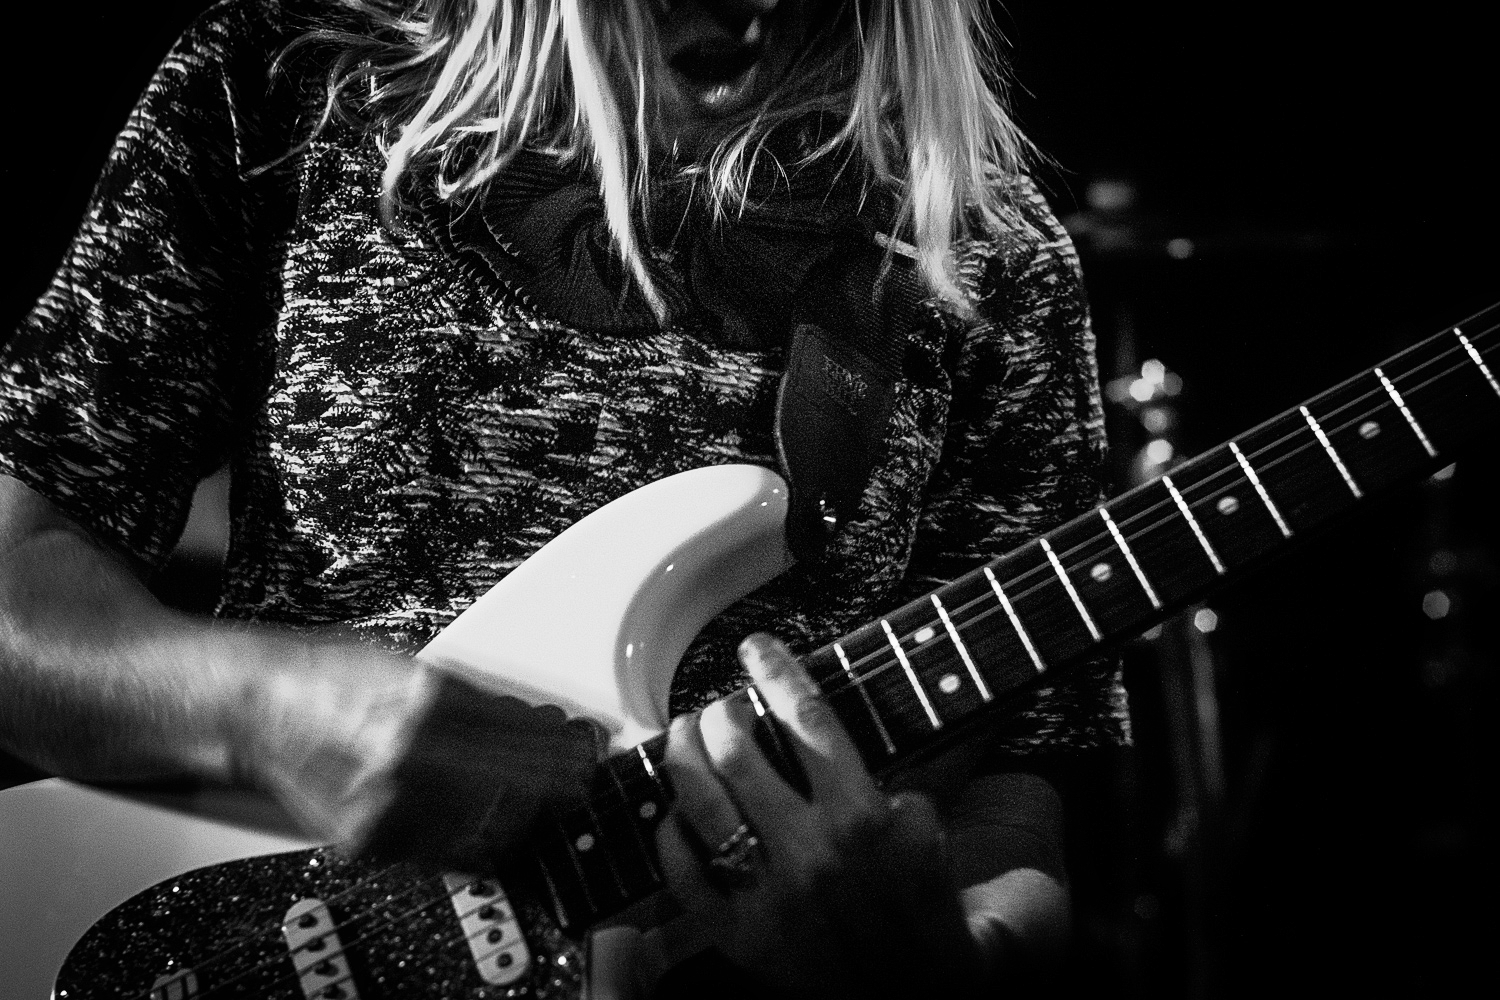 20180820-009-The-Joy-Formidable-@-Blue-Shell-Köln-Cred_Michael_Lamertz_@indie.and_.more_.jpg